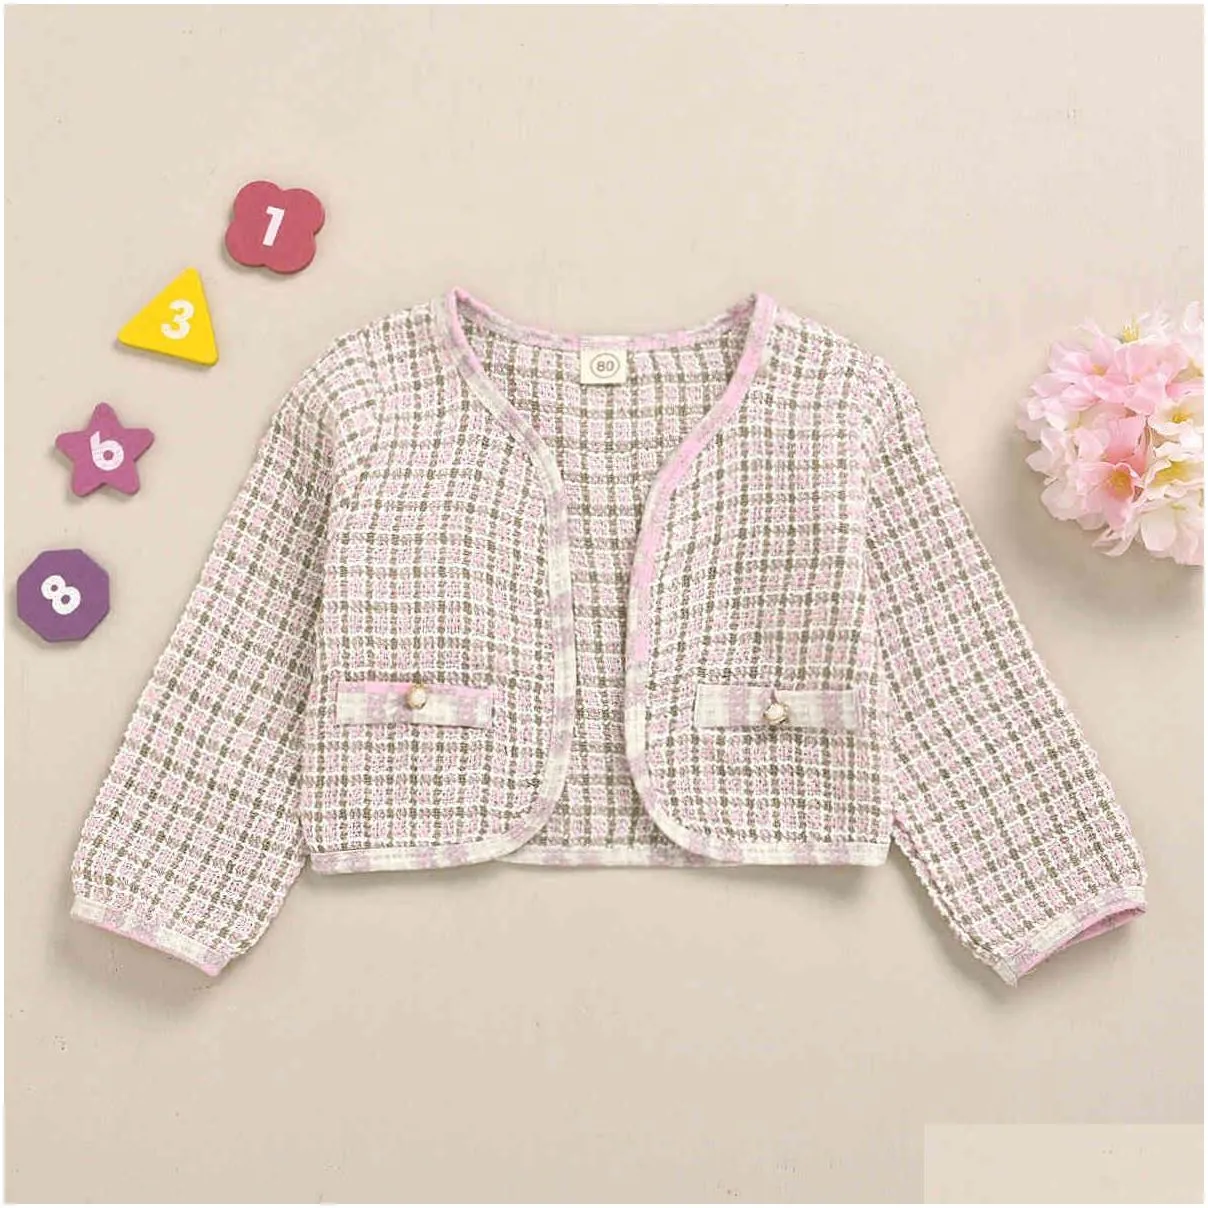 1-6 years old quality material designer two pieces of clothes and coats beatufil fashionable toddler girl suits cute little baby girl